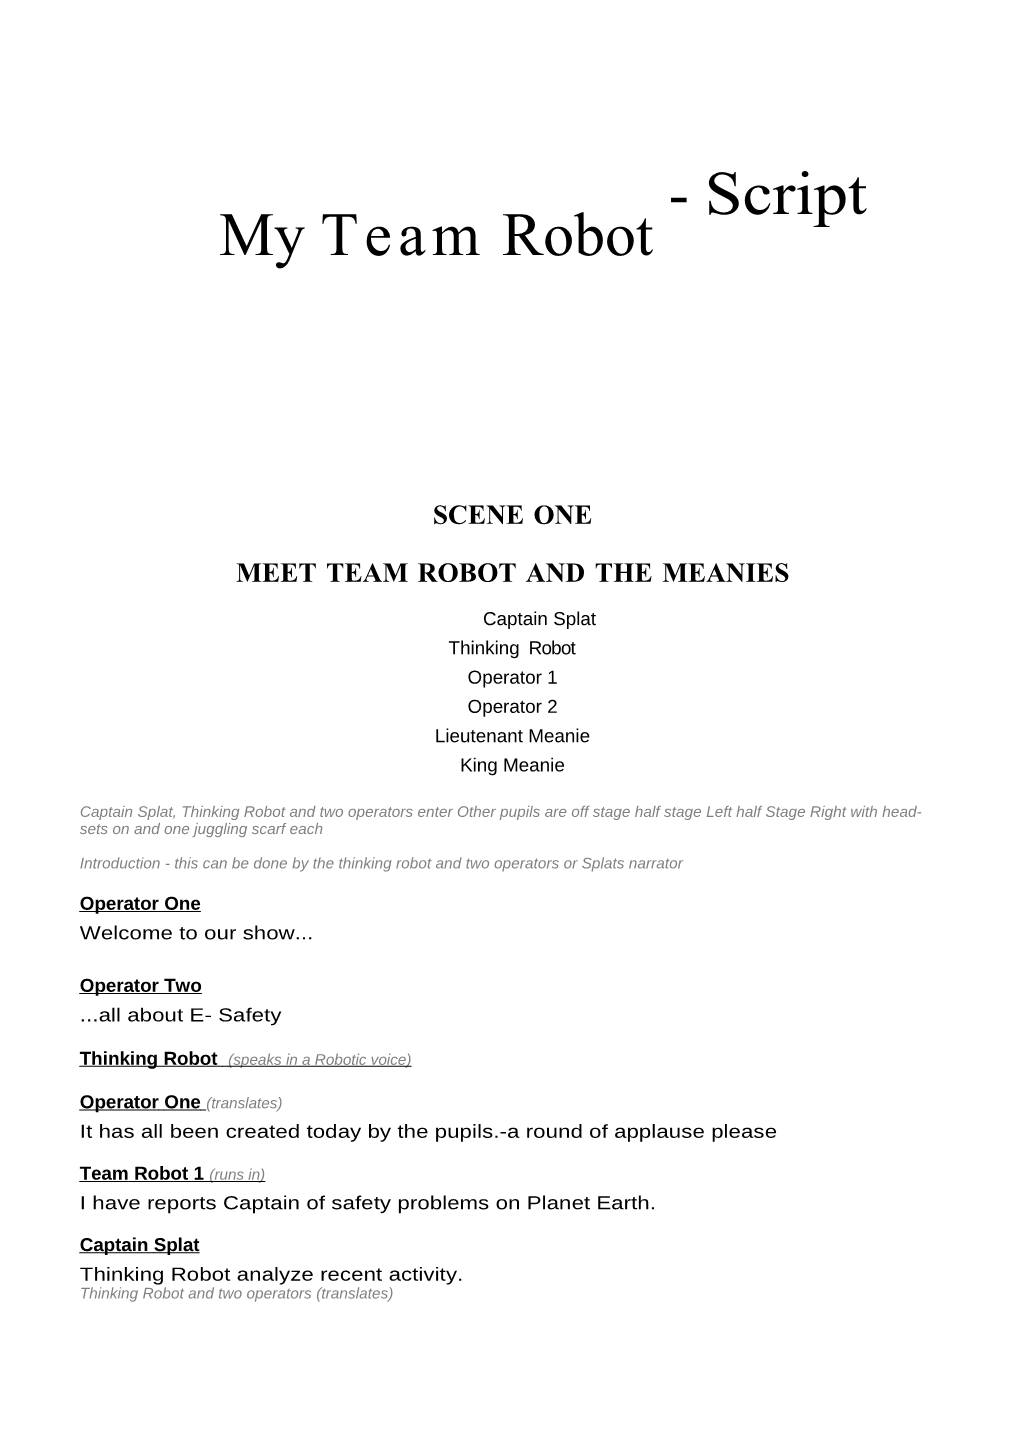 Meet Team Robot and the Meanies